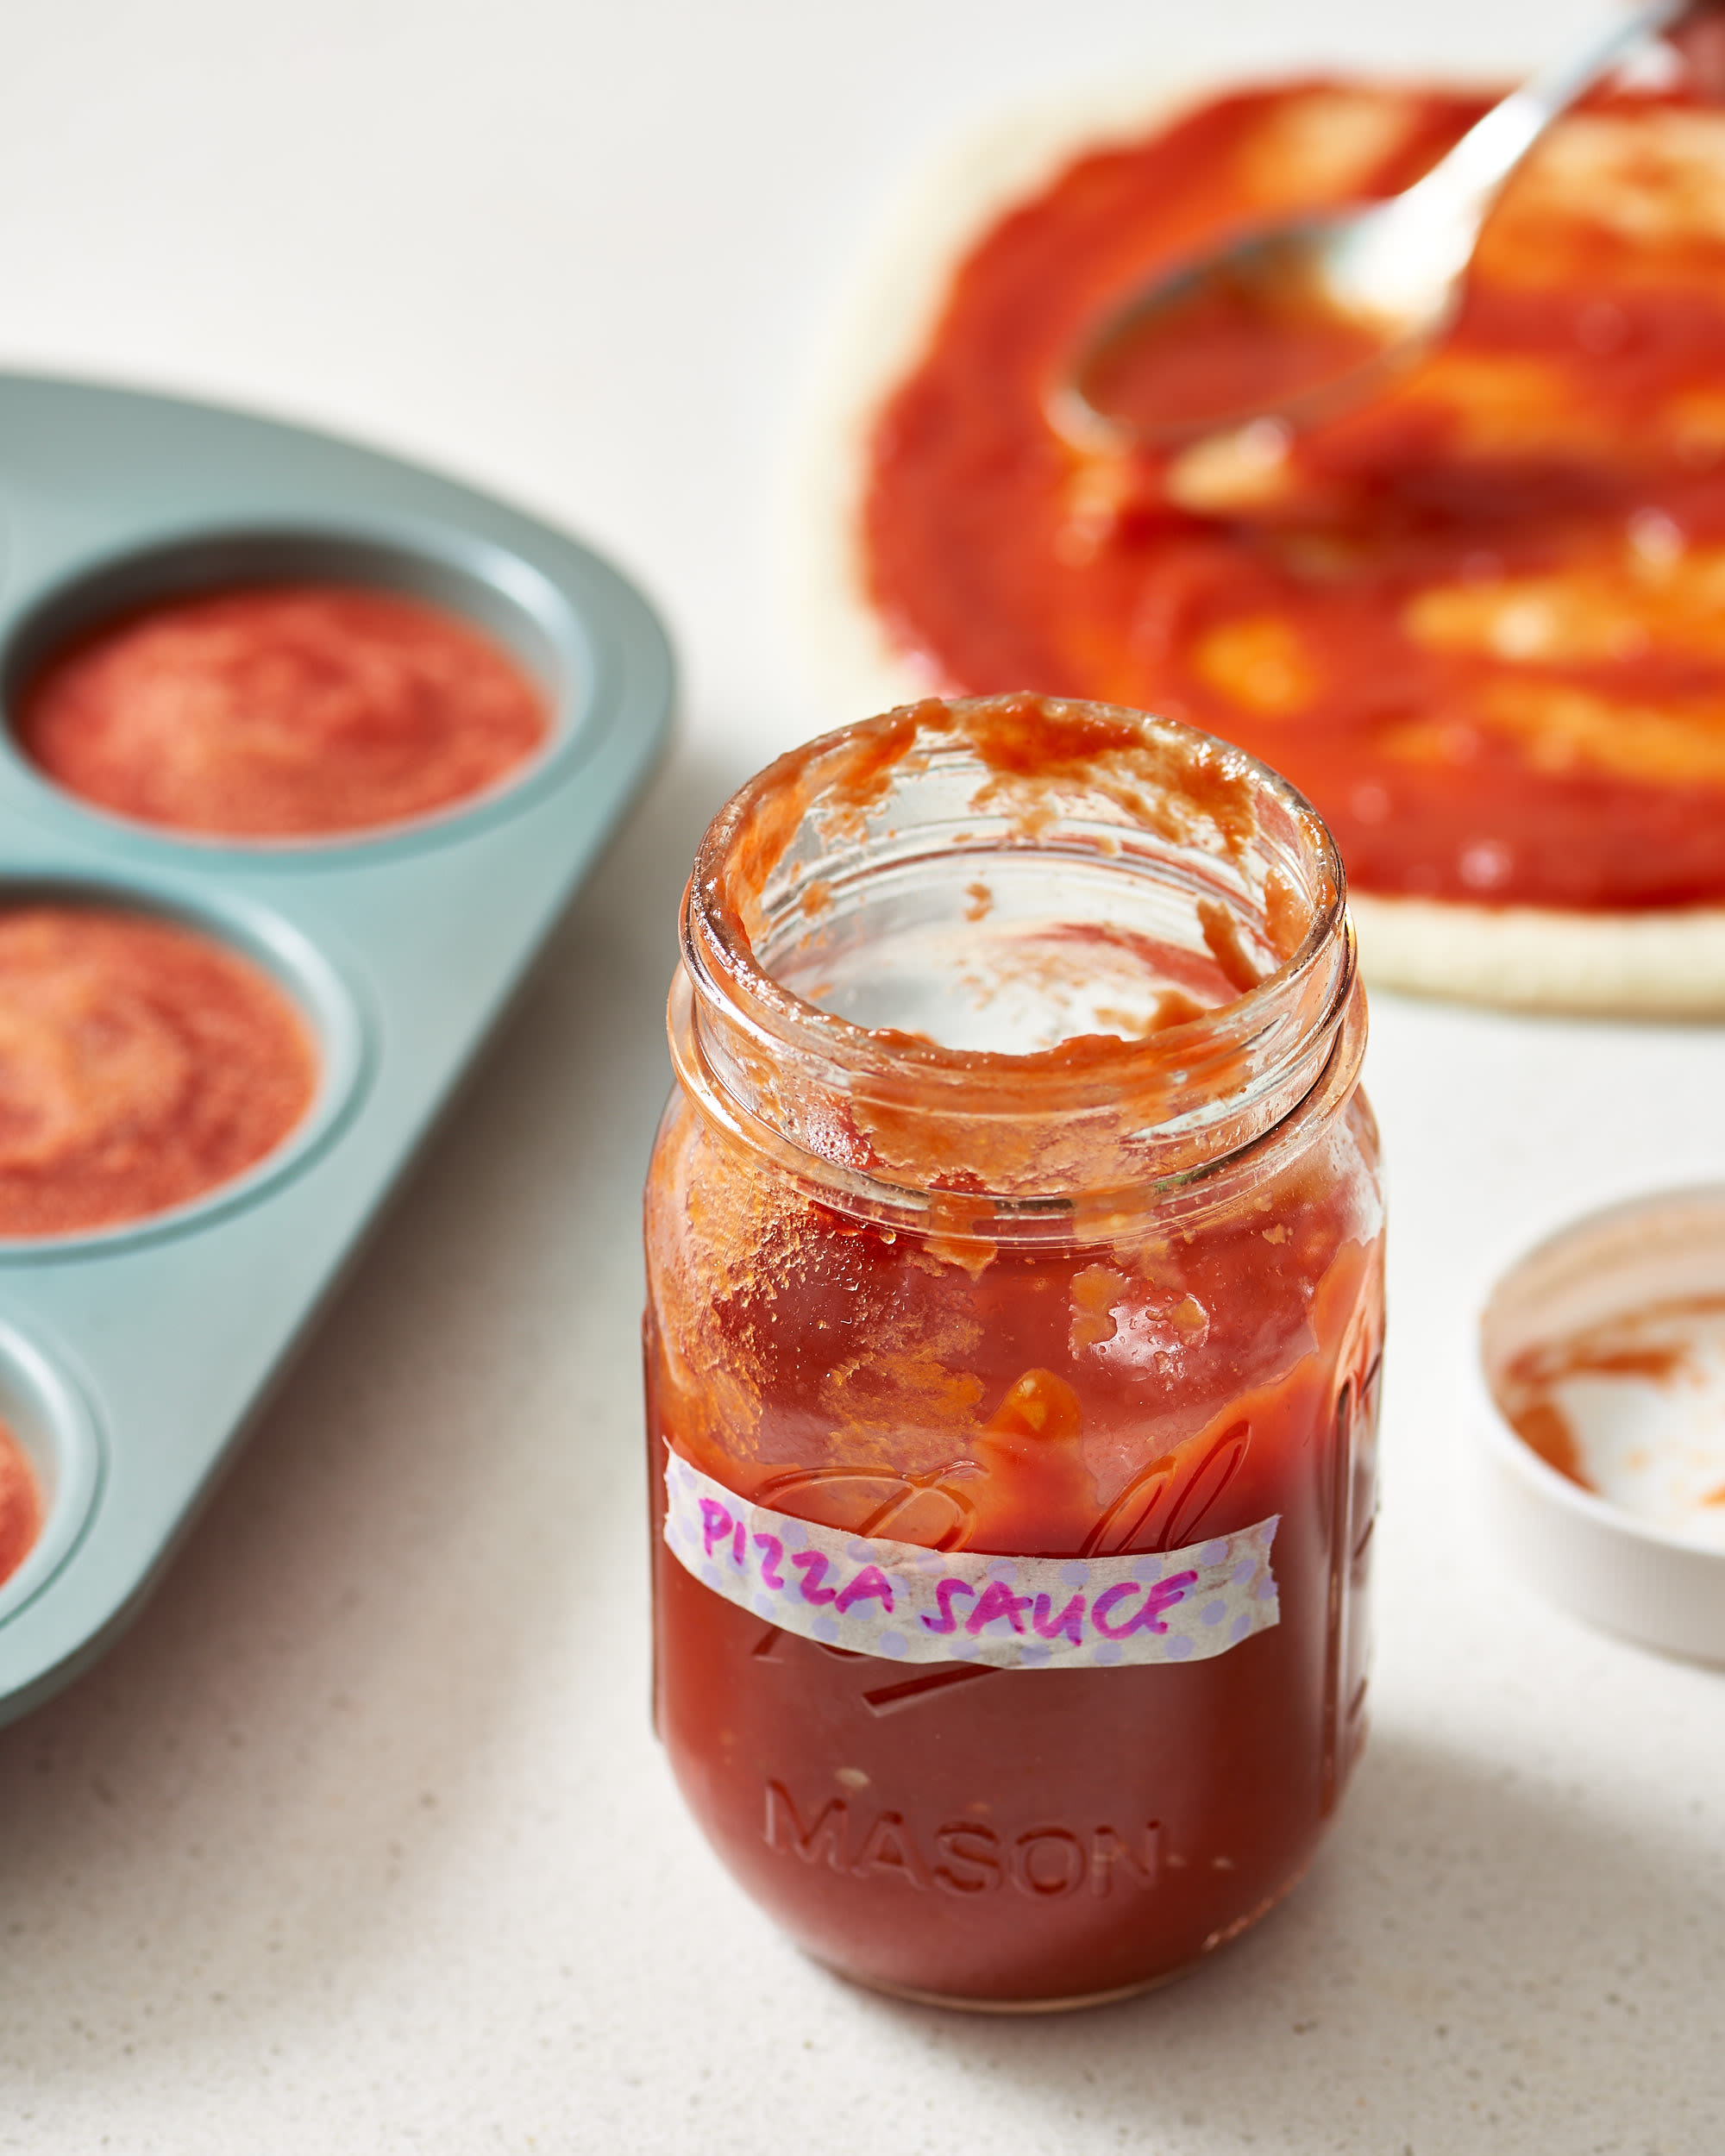 How To Make Pizza Sauce - Recipe | Kitchn